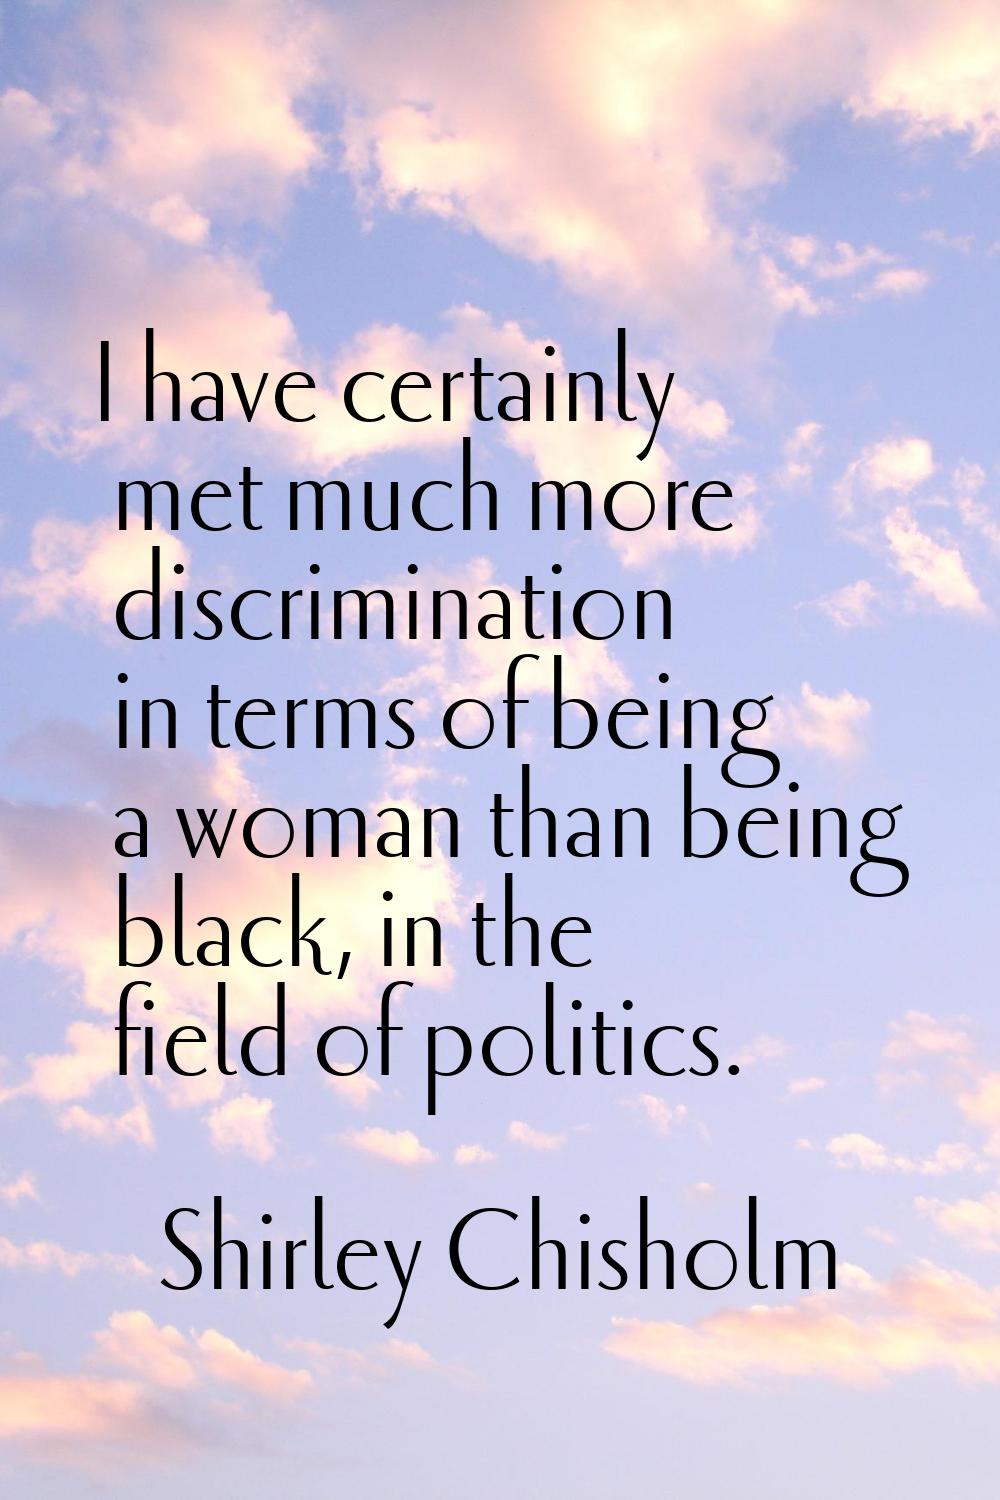 I have certainly met much more discrimination in terms of being a woman than being black, in the fi